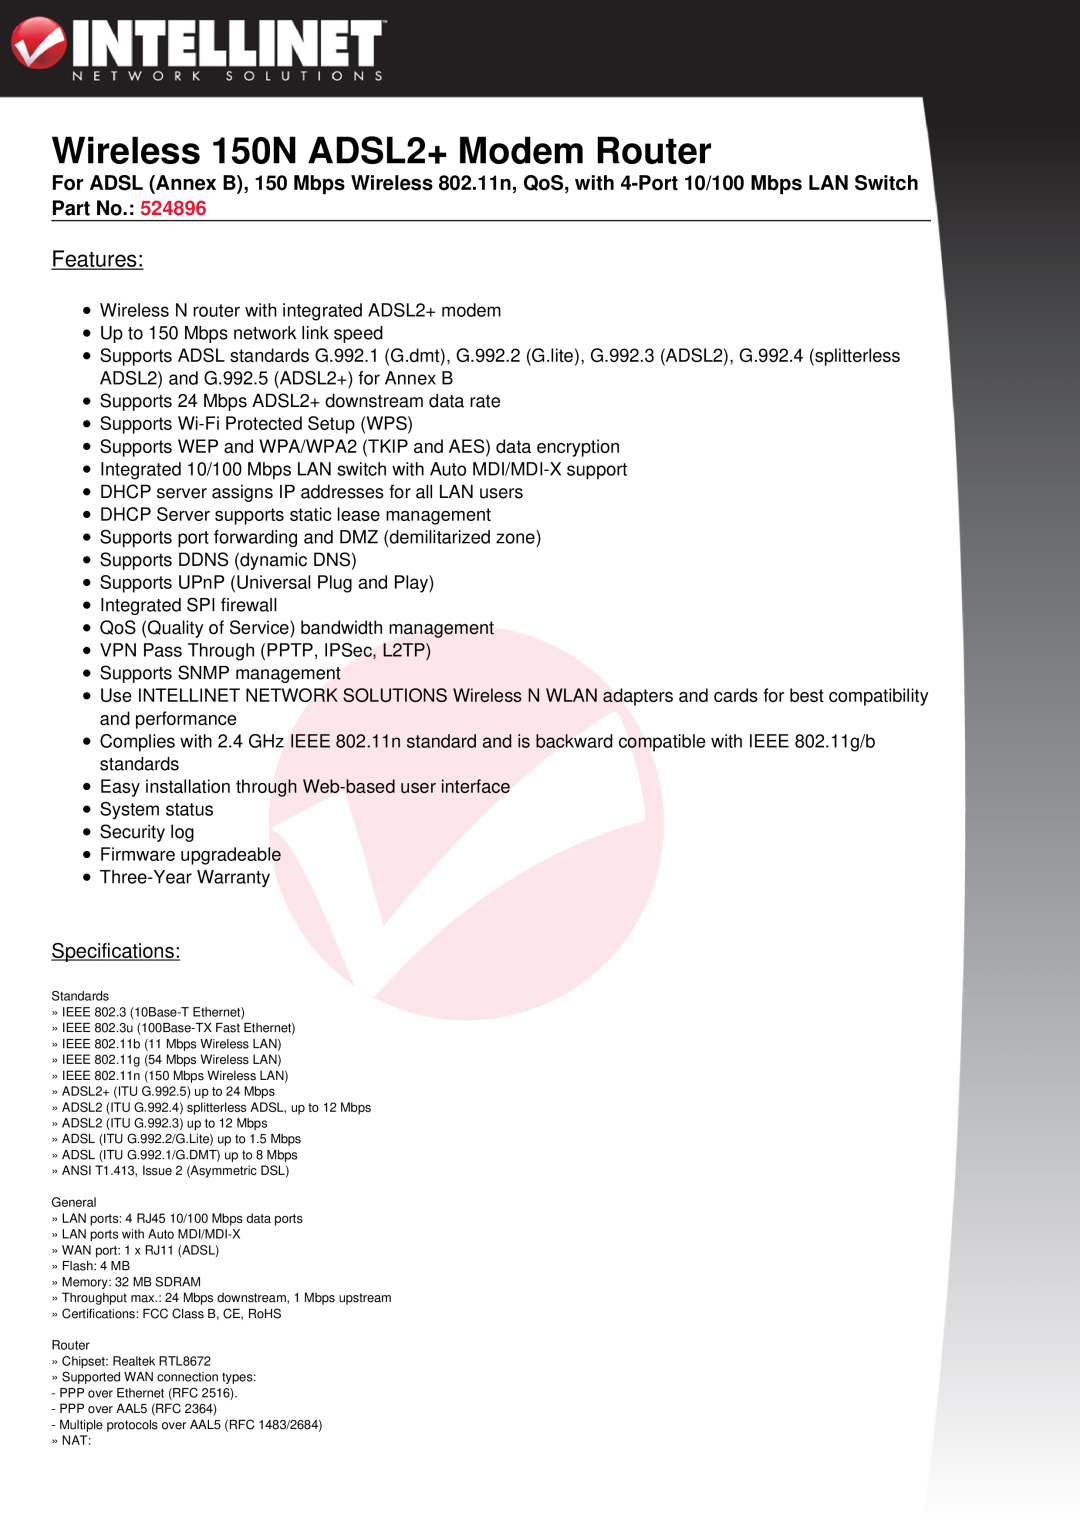 Intellinet Network Solutions manual Wireless 150N ADSL2+ Modem Router, Features, Specifications 